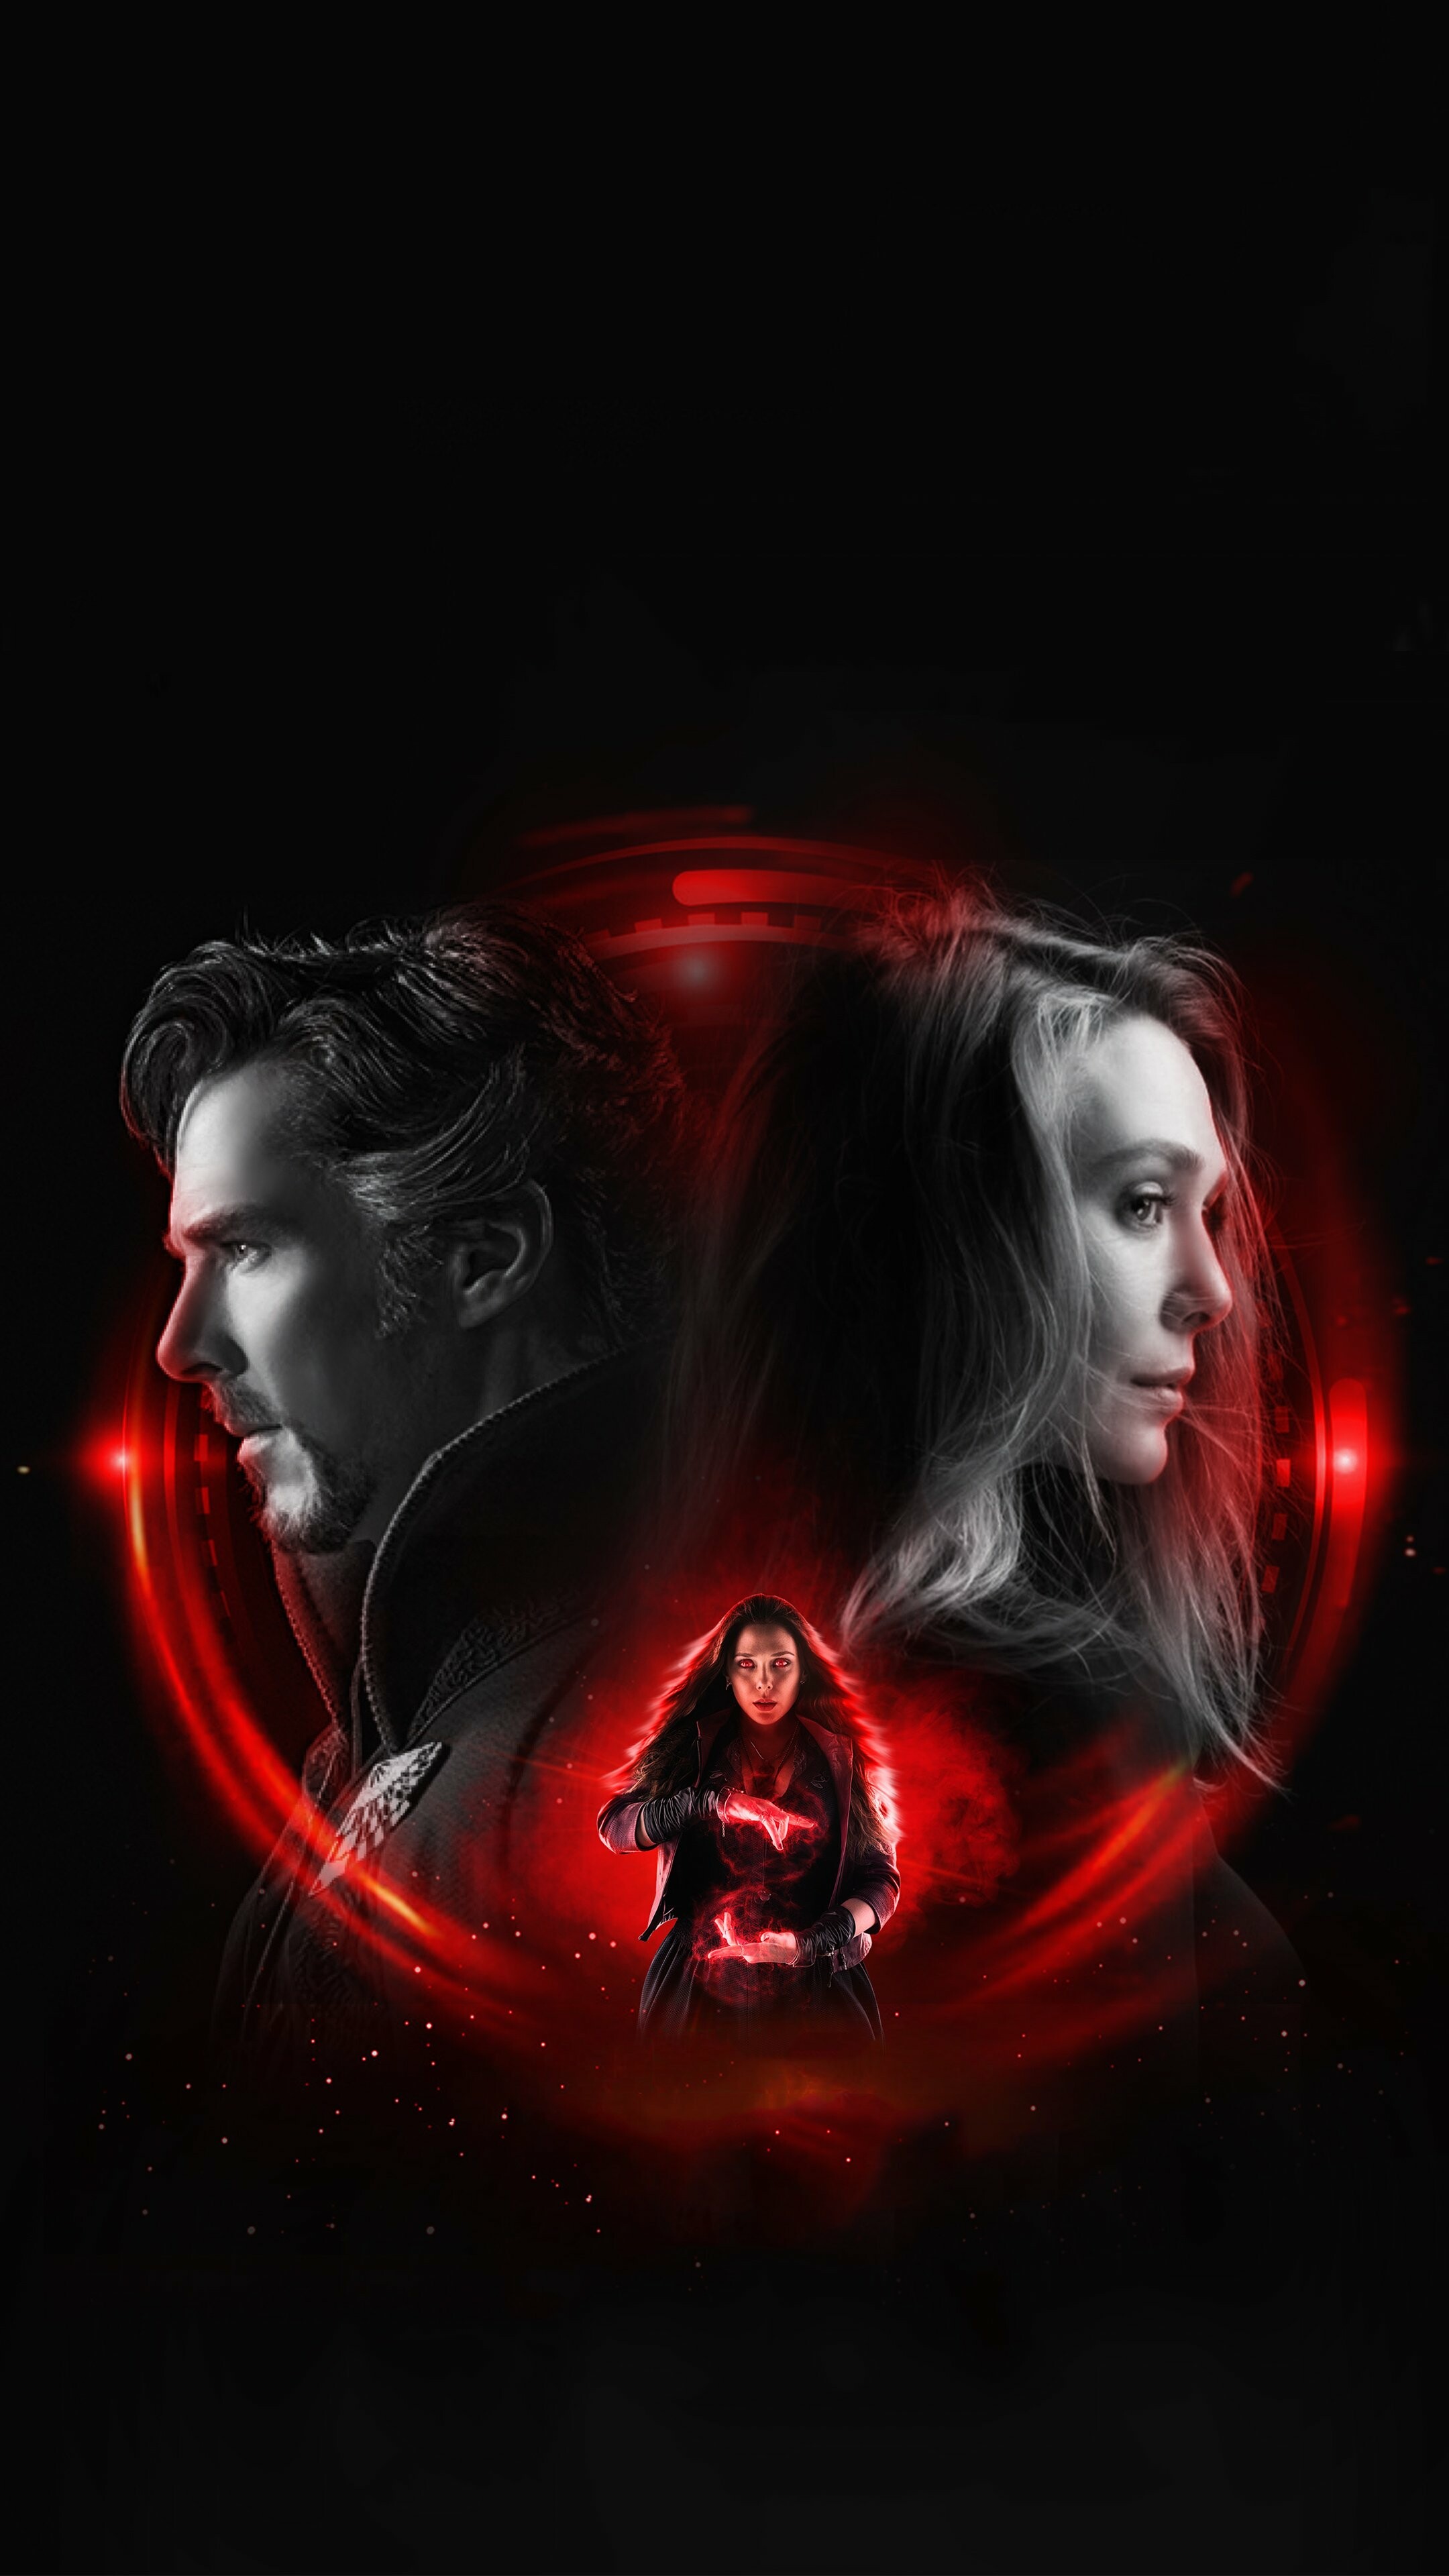 Doctor Strange in the Multiverse of Madness: Benedict Cumberbatch and Elizabeth Olsen, 2022 movie. 2160x3840 4K Background.